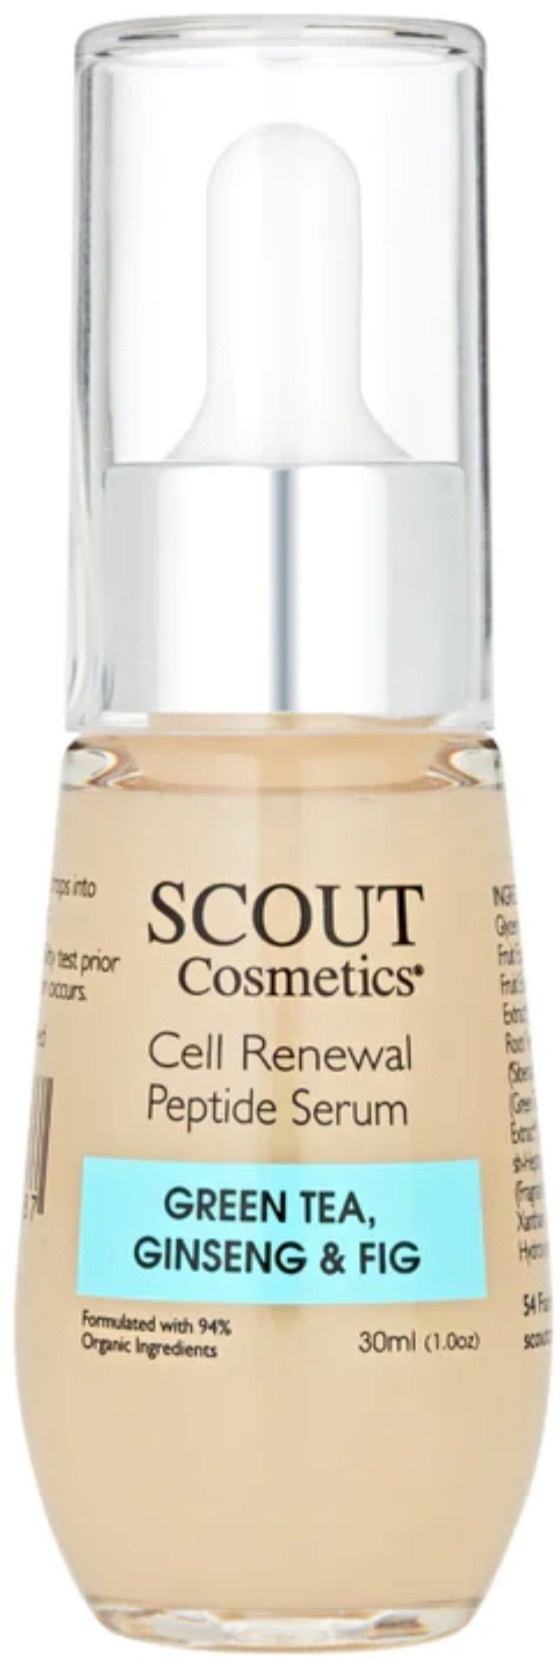 SCOUT Cosmetics Cell Renewal Peptide Serum